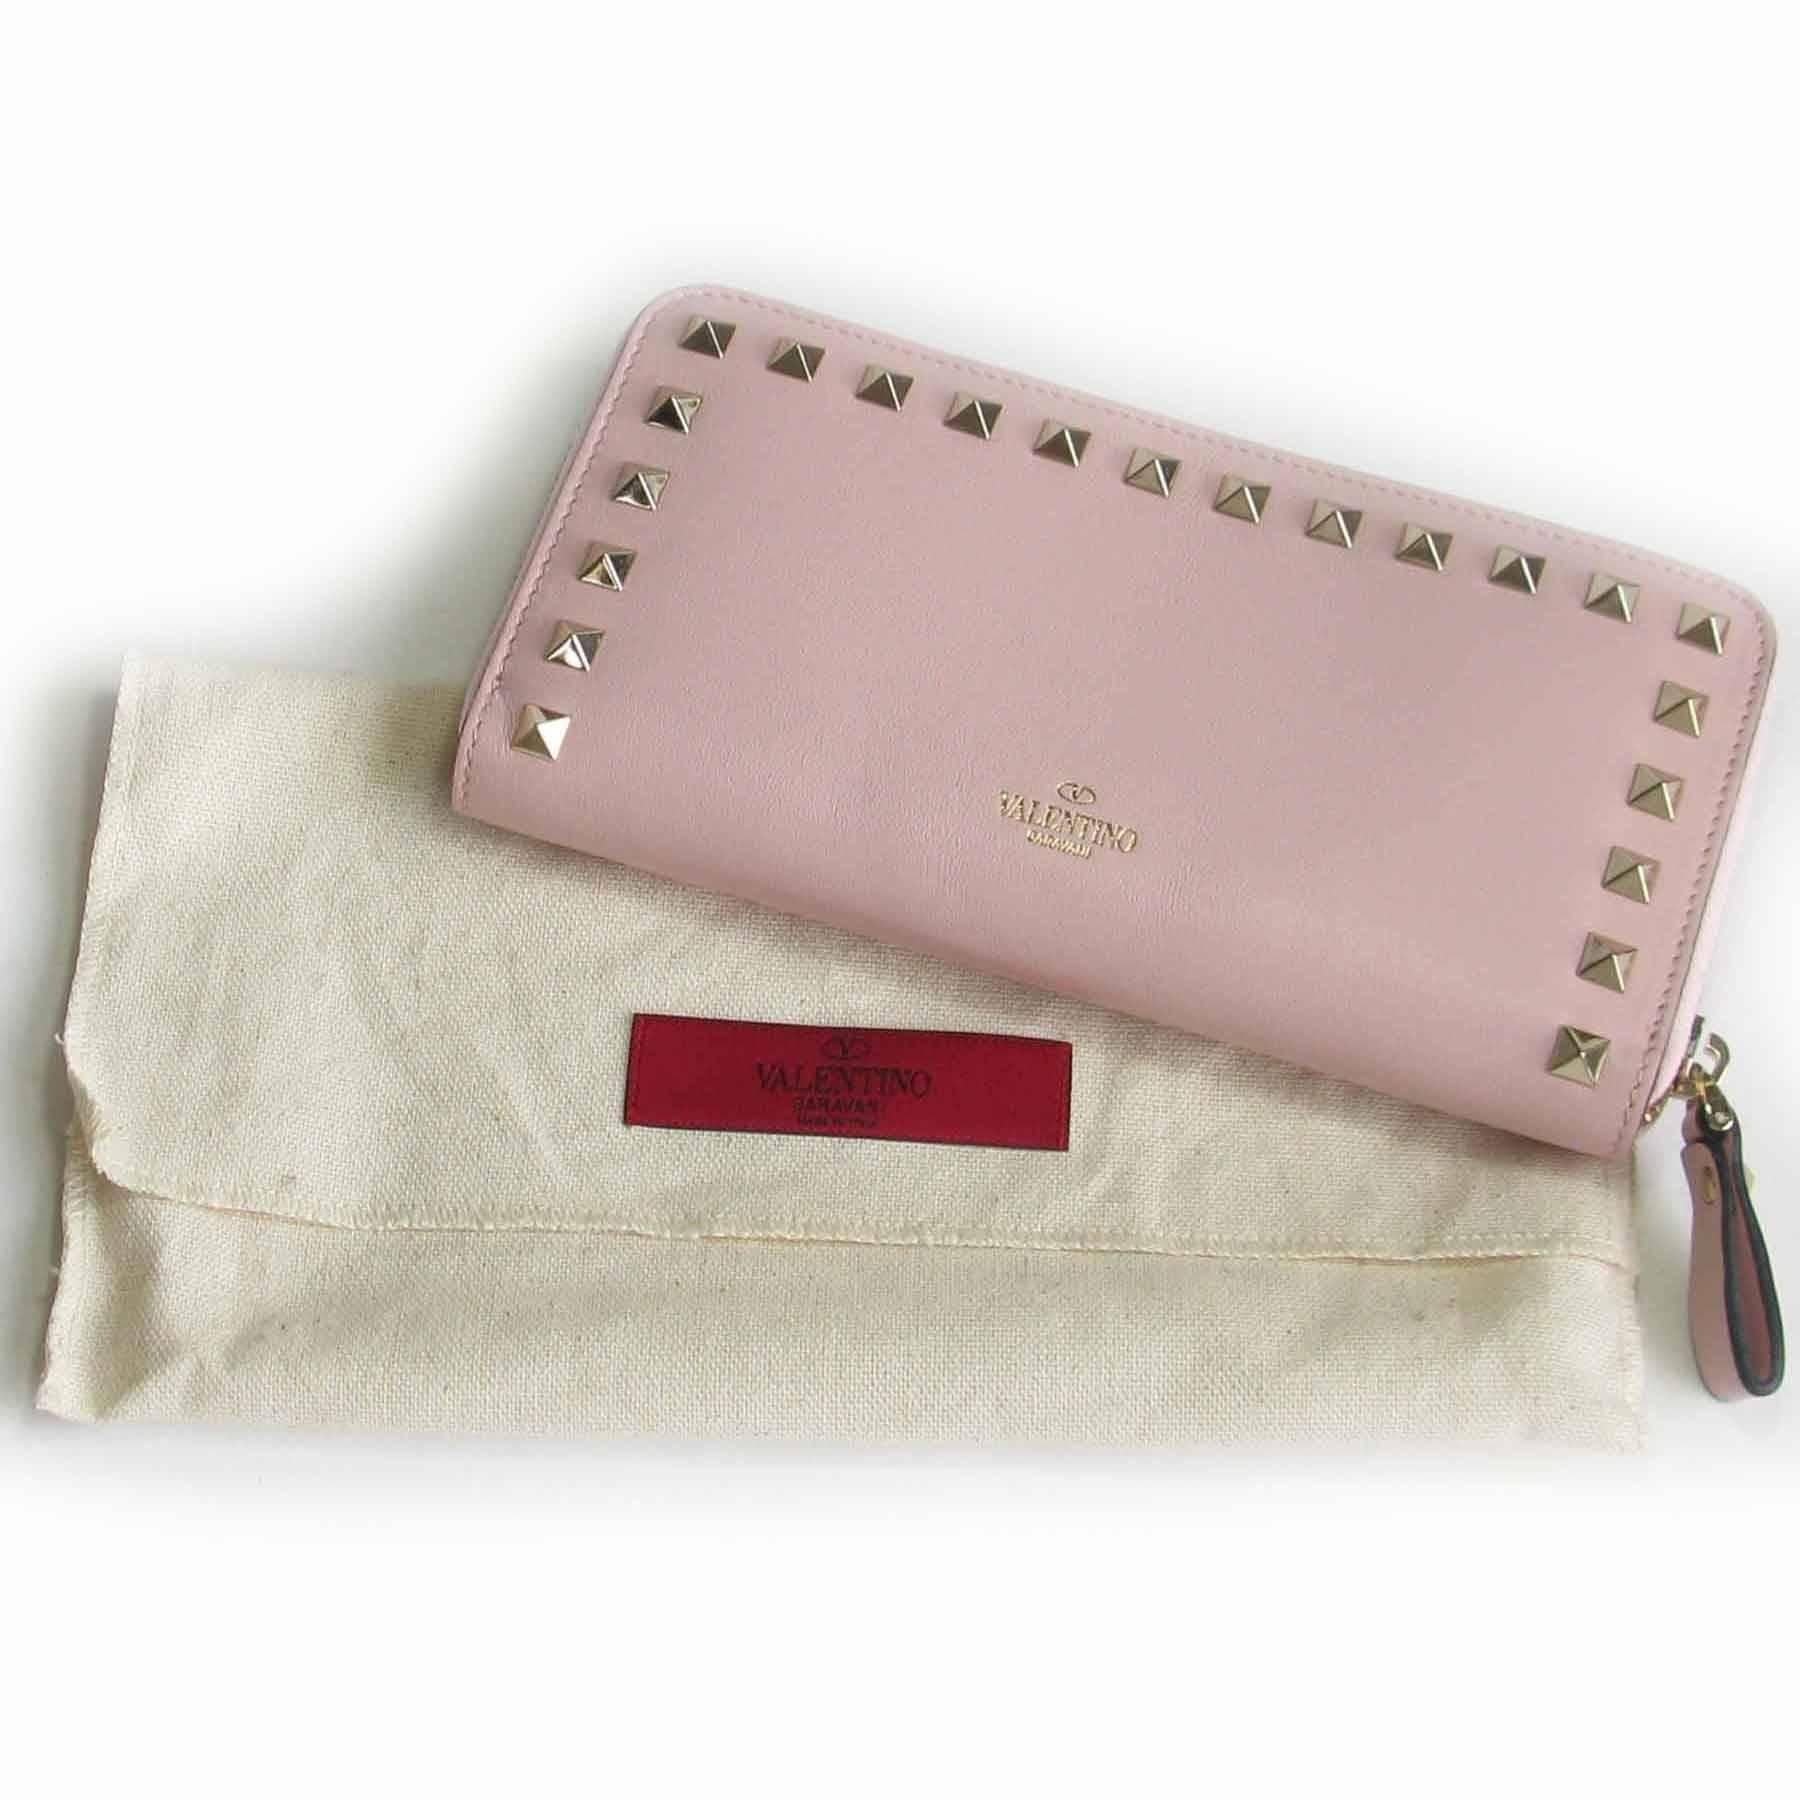 Valentino 'Rockstud' wallet in pink leather, finished in gold metal studs. Zip closure.

Inside you will find: 3 large billows, a zipped wallet, 2 flat pockets and 12 card slots.

Made in Italy.

Dimensions: length: 19, height: 10cm, depth: 2.5